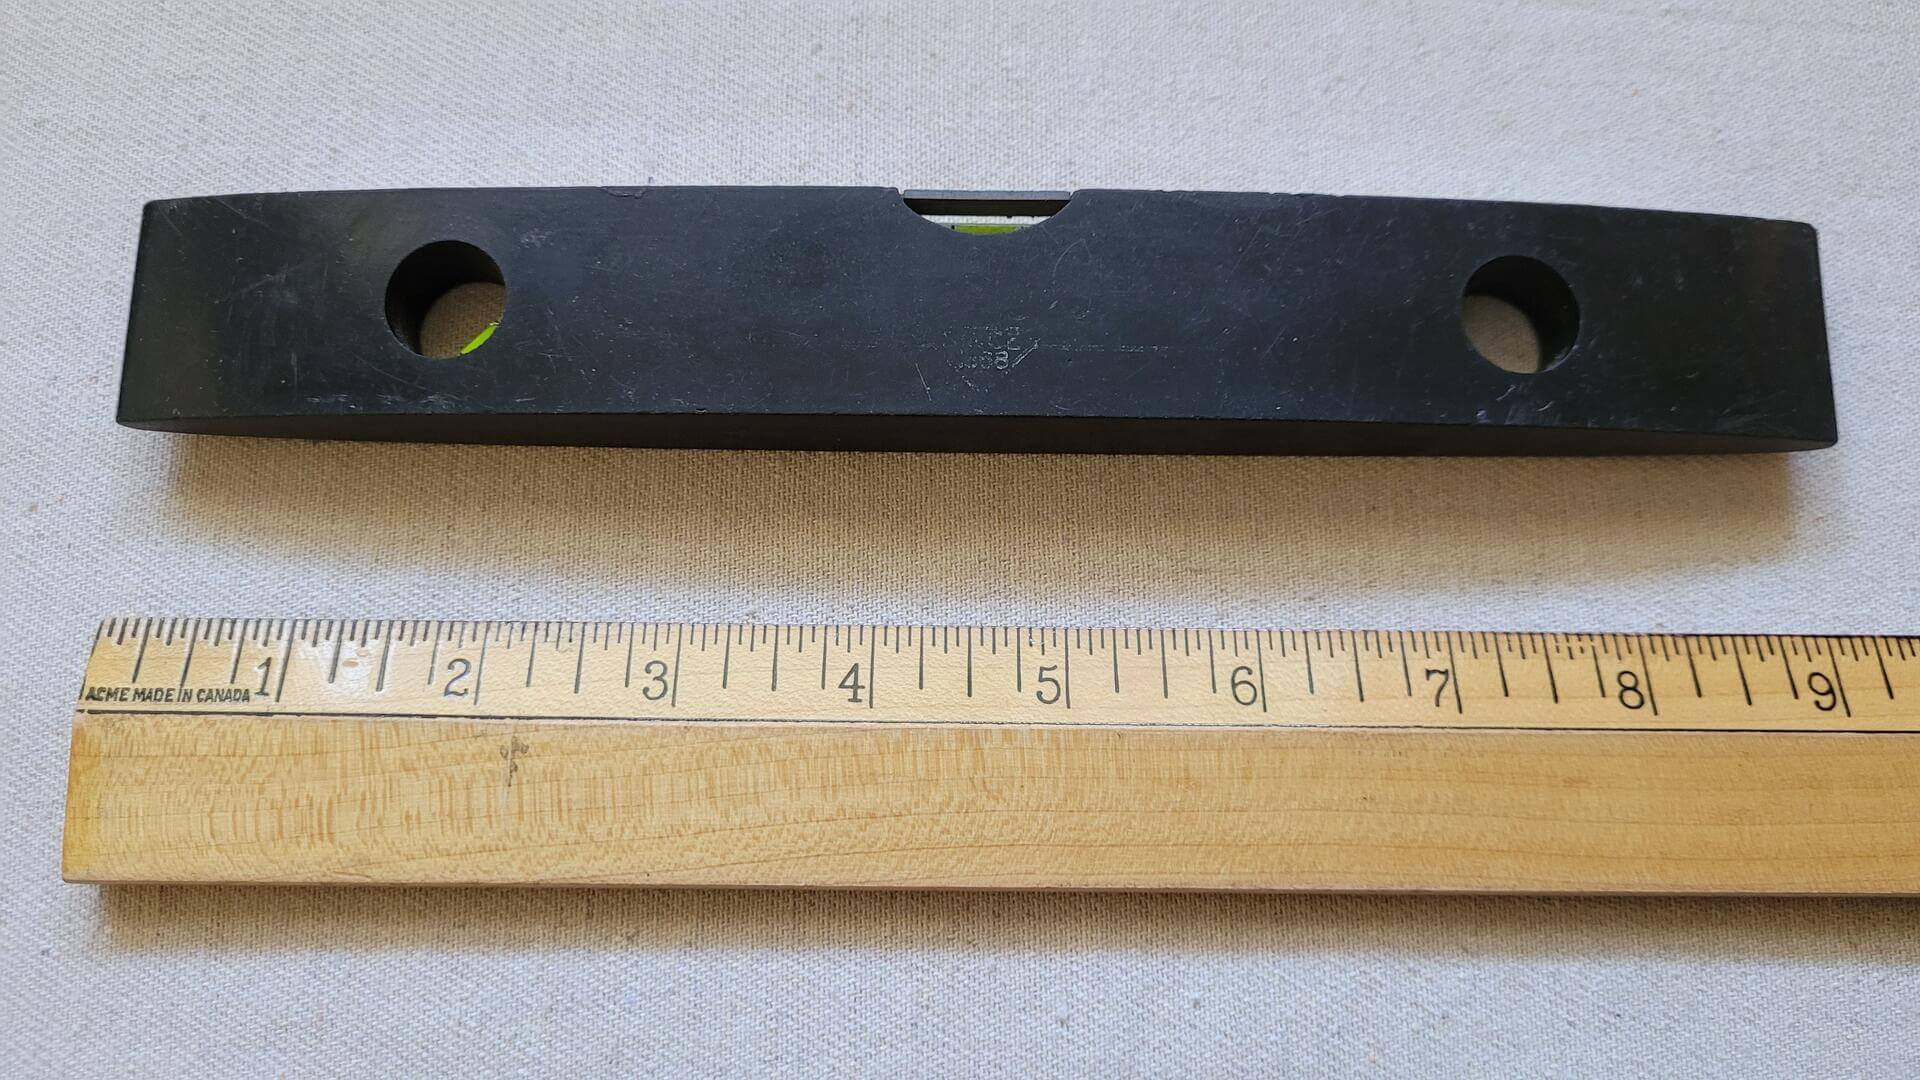 miller-falls-tools-no-590-bakelite-torpedo-level-9-inches-3-bubbles-antique-vintage-made-in-usa-marking-measuring-hand-tools-measurements